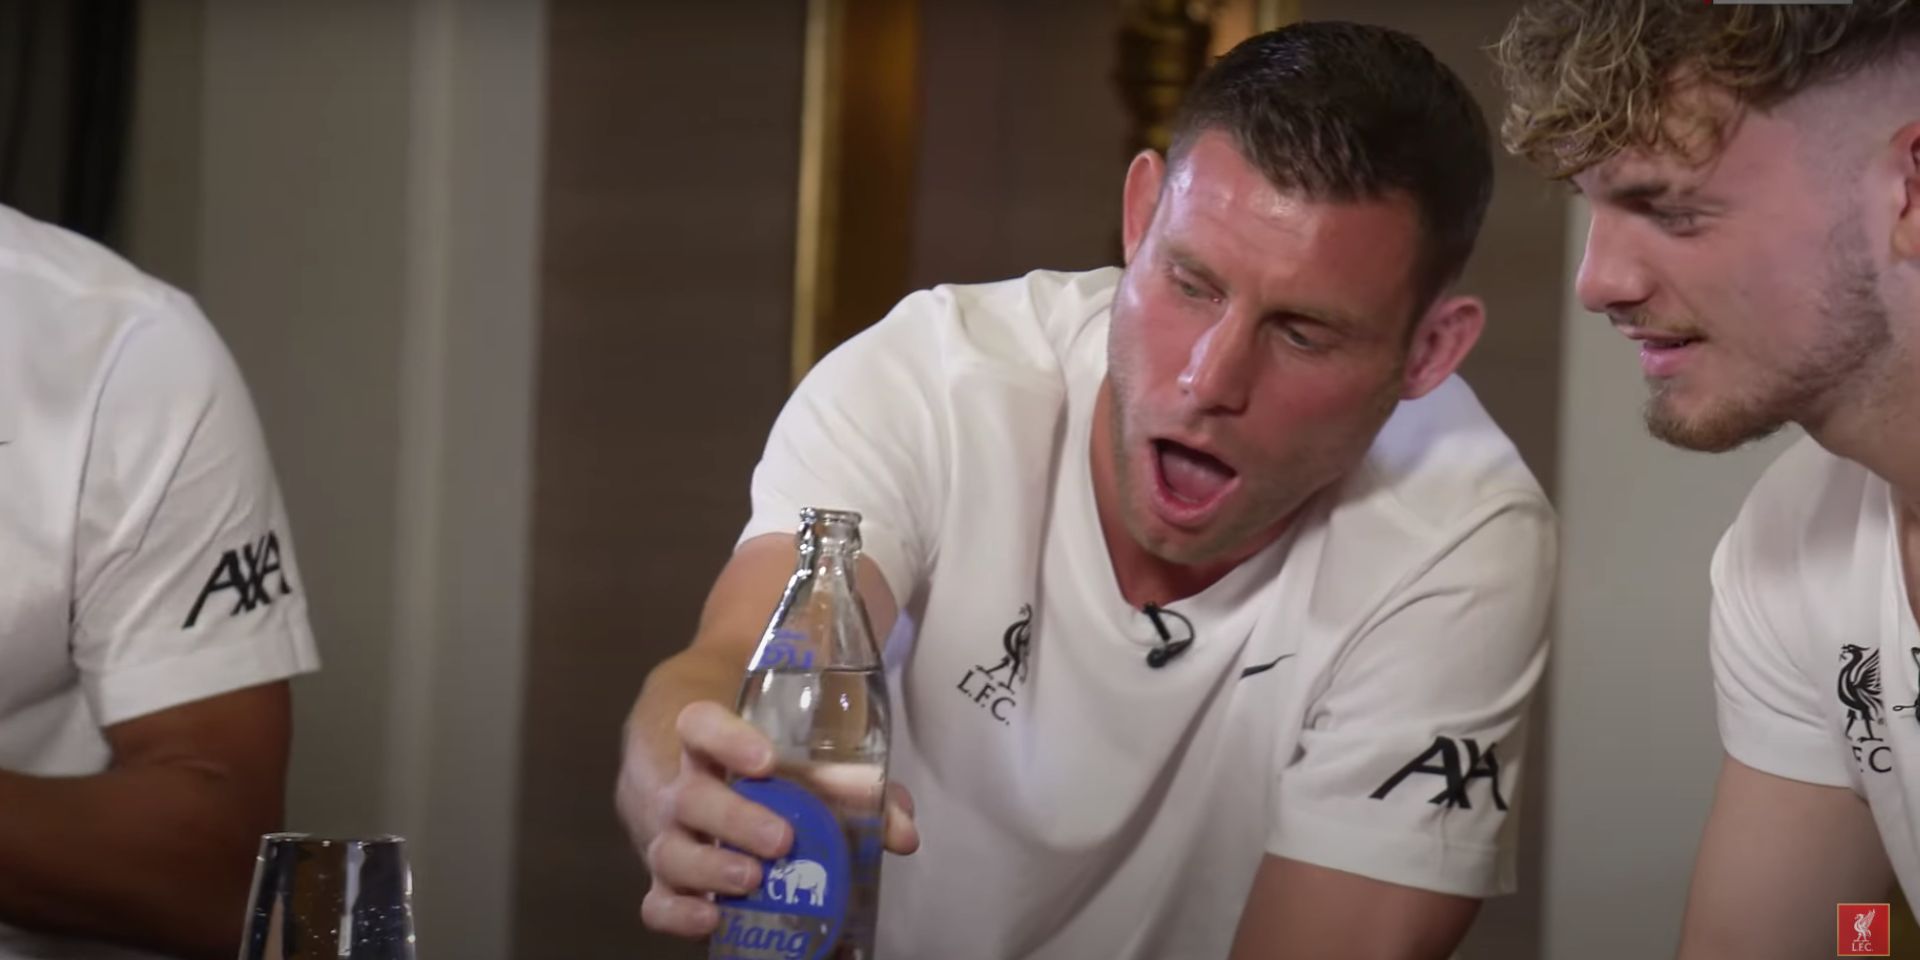 (Video) Milner and Oxlade-Chamberlain face Elliott and Carvalho in TikTok challenges during Asian tour